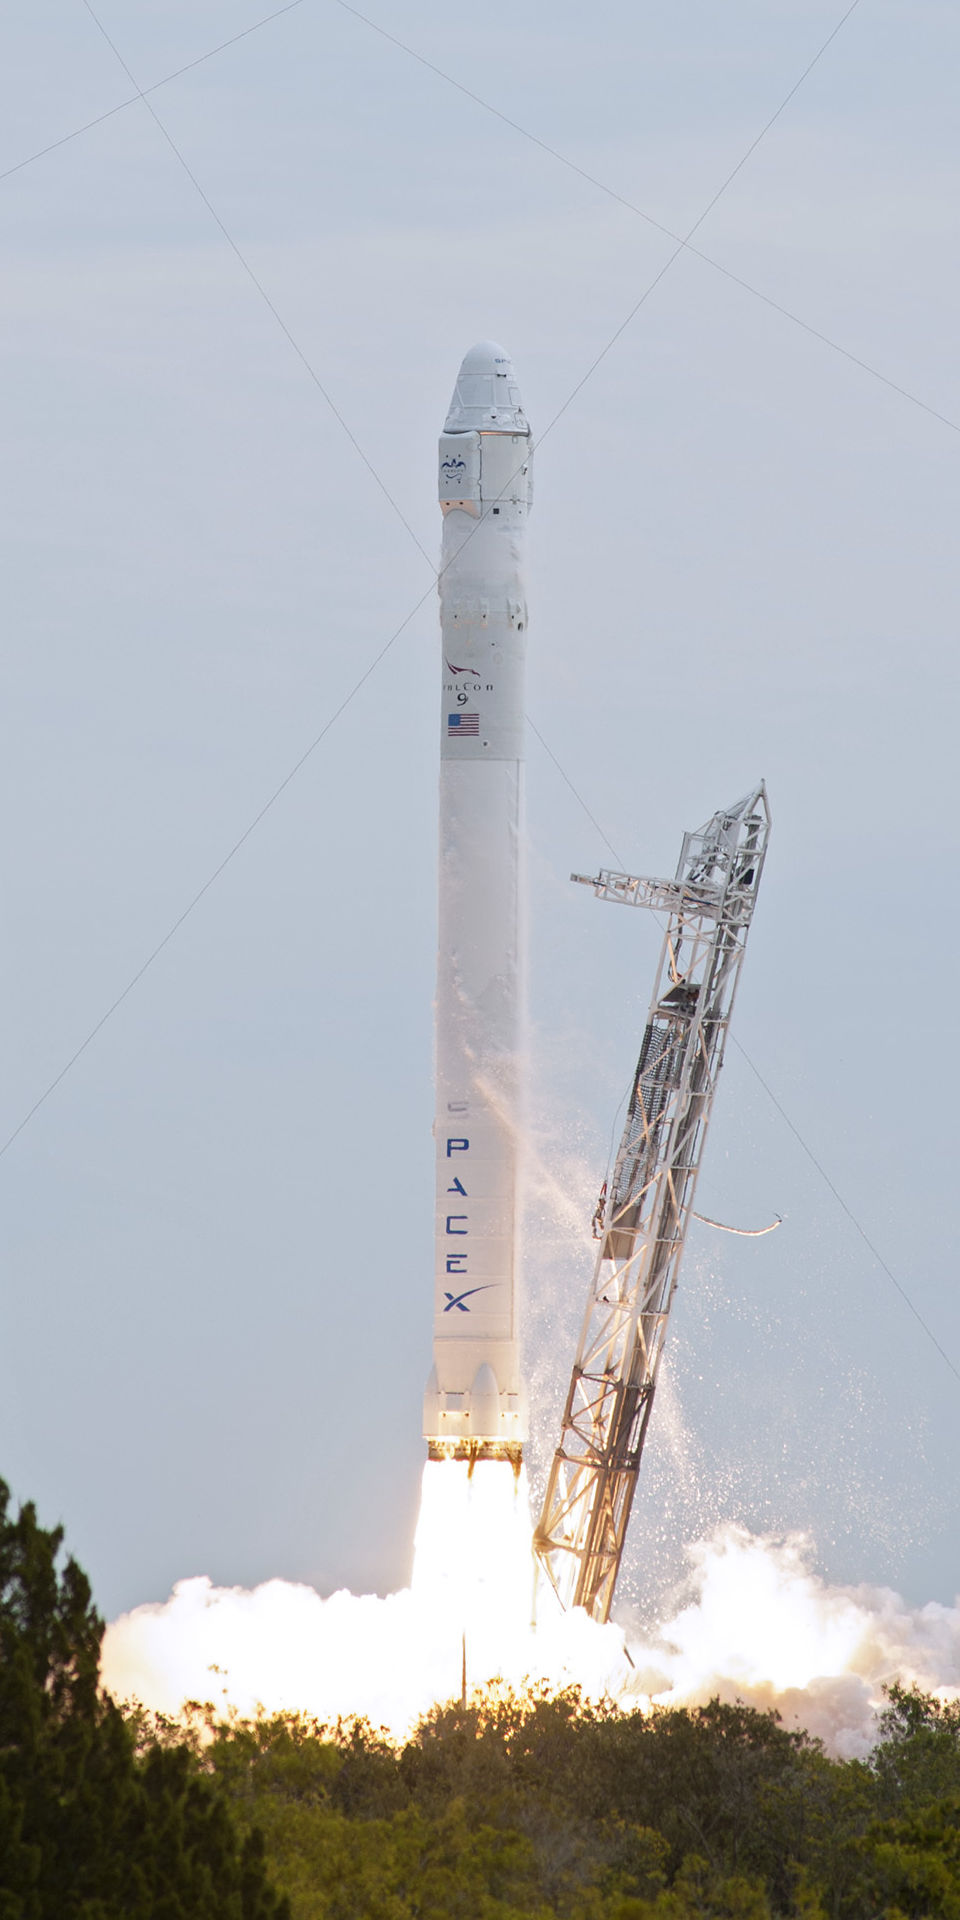 The CRS-2 Falcon 9 lifts off, carrying the Dragon capsule to the ISS.